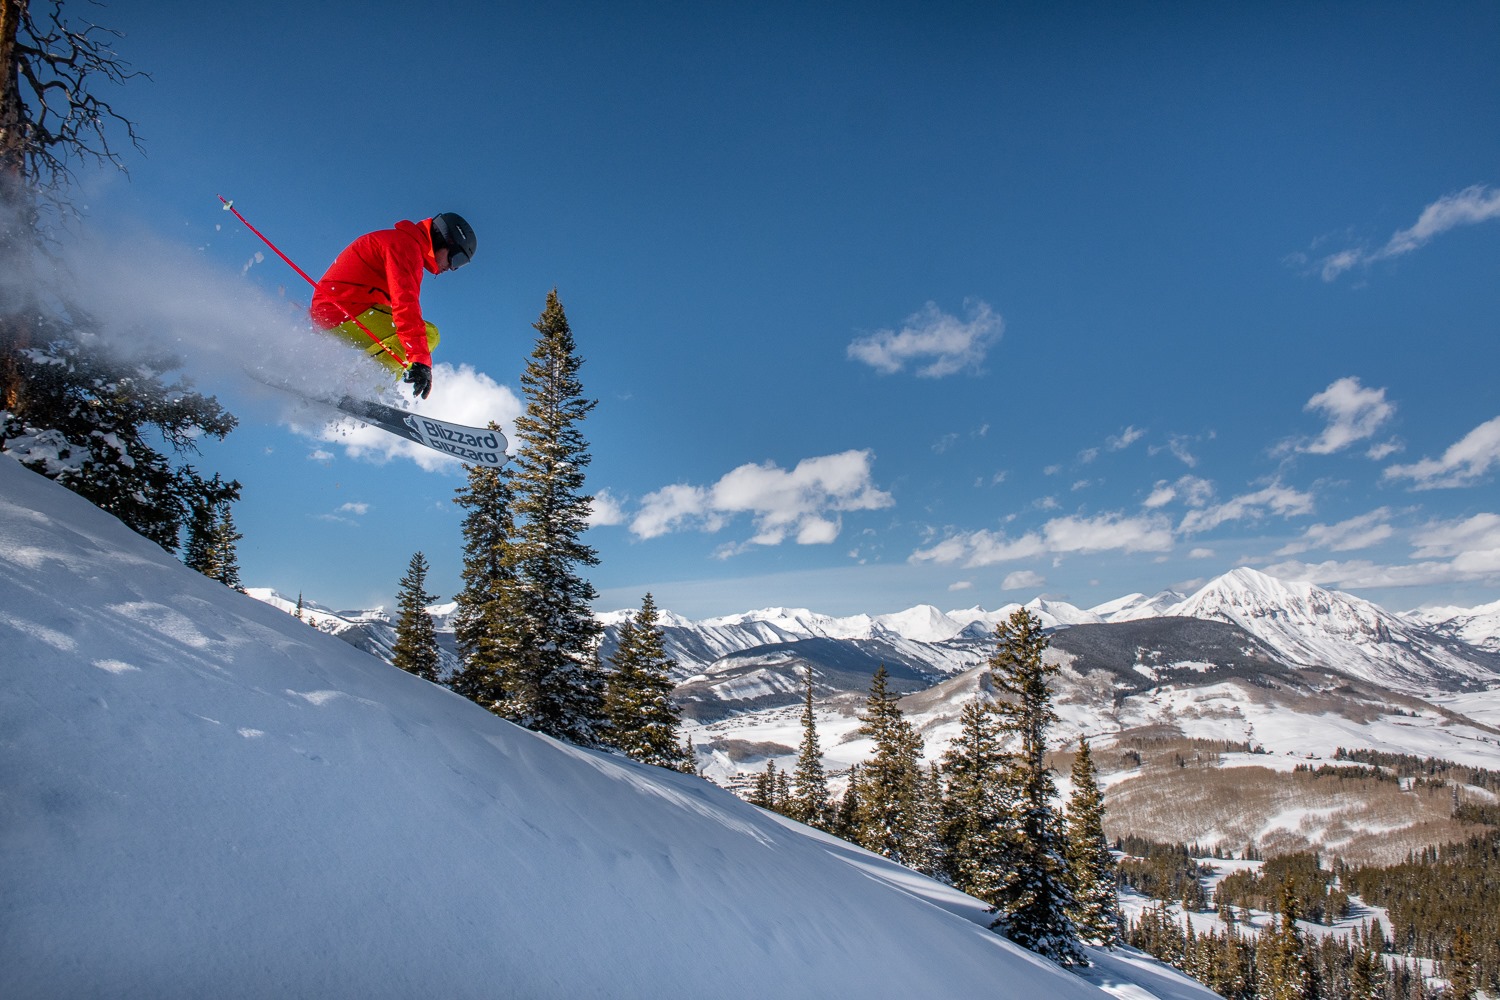 303 Magazine, 303 Outdoor + Travel, Colorado Skiing, Crested Butte